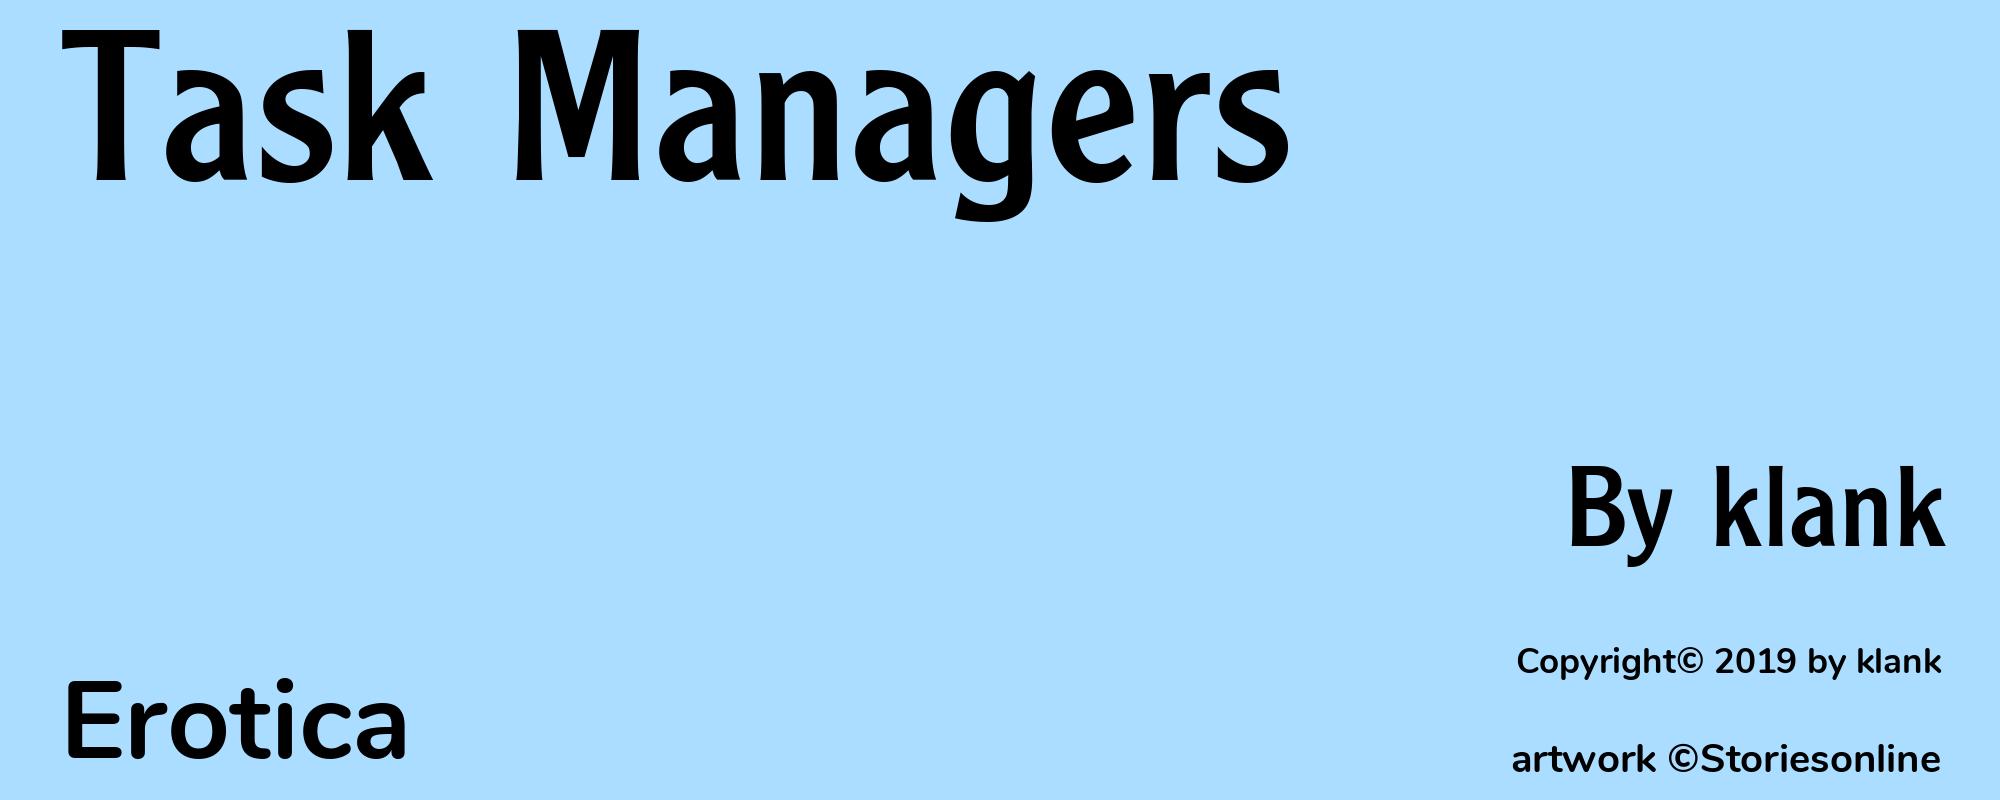 Task Managers - Cover